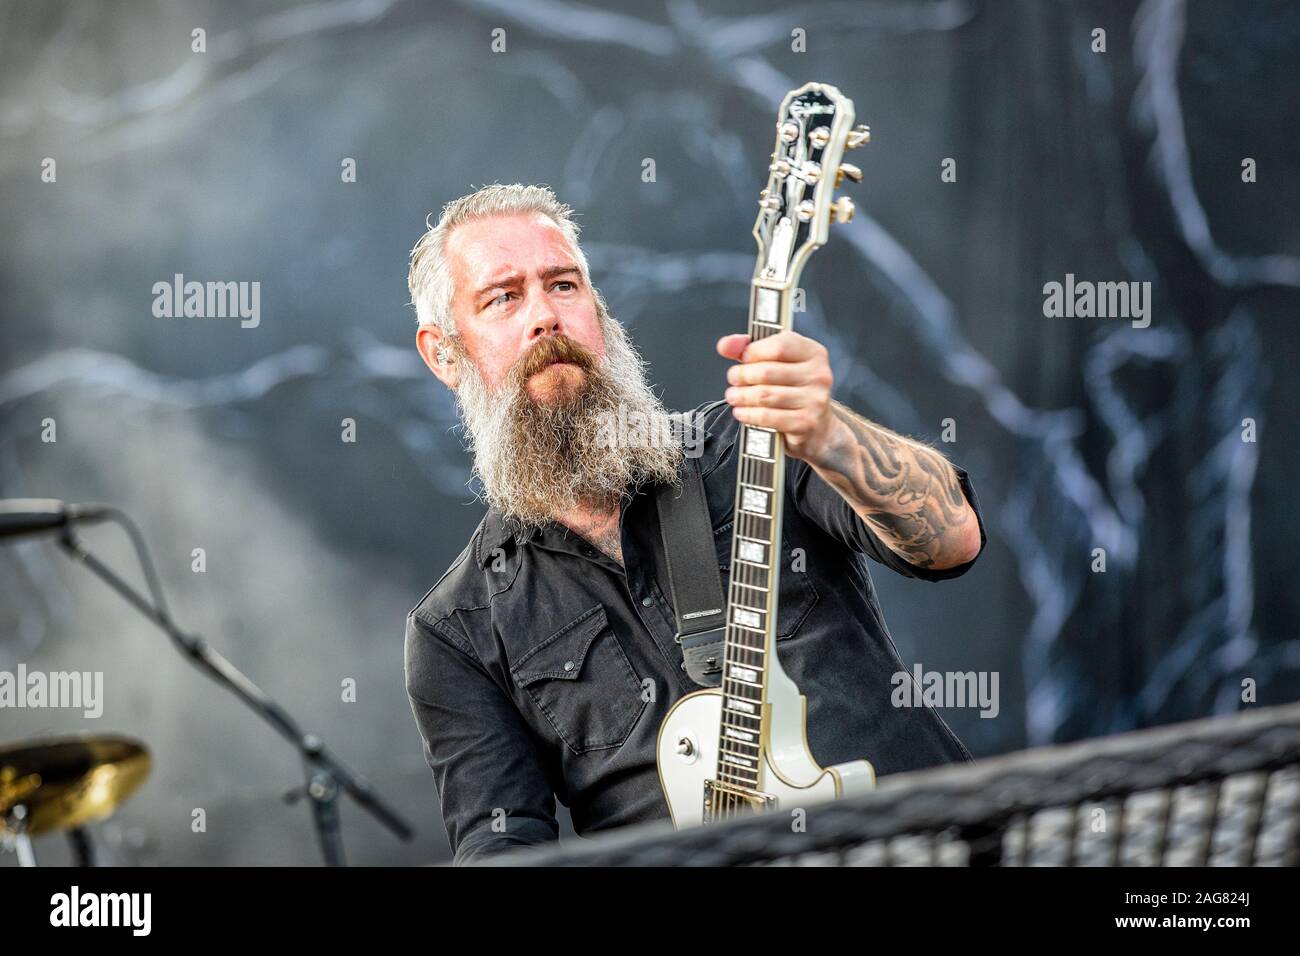 Oslo, Norway. 29th, June 2019. The Swedish heavy metal band In Flames  performs a live concert during the Norwegian music festival Tons of Rock  2019 in Oslo. Here guitarist Björn Gelotte is